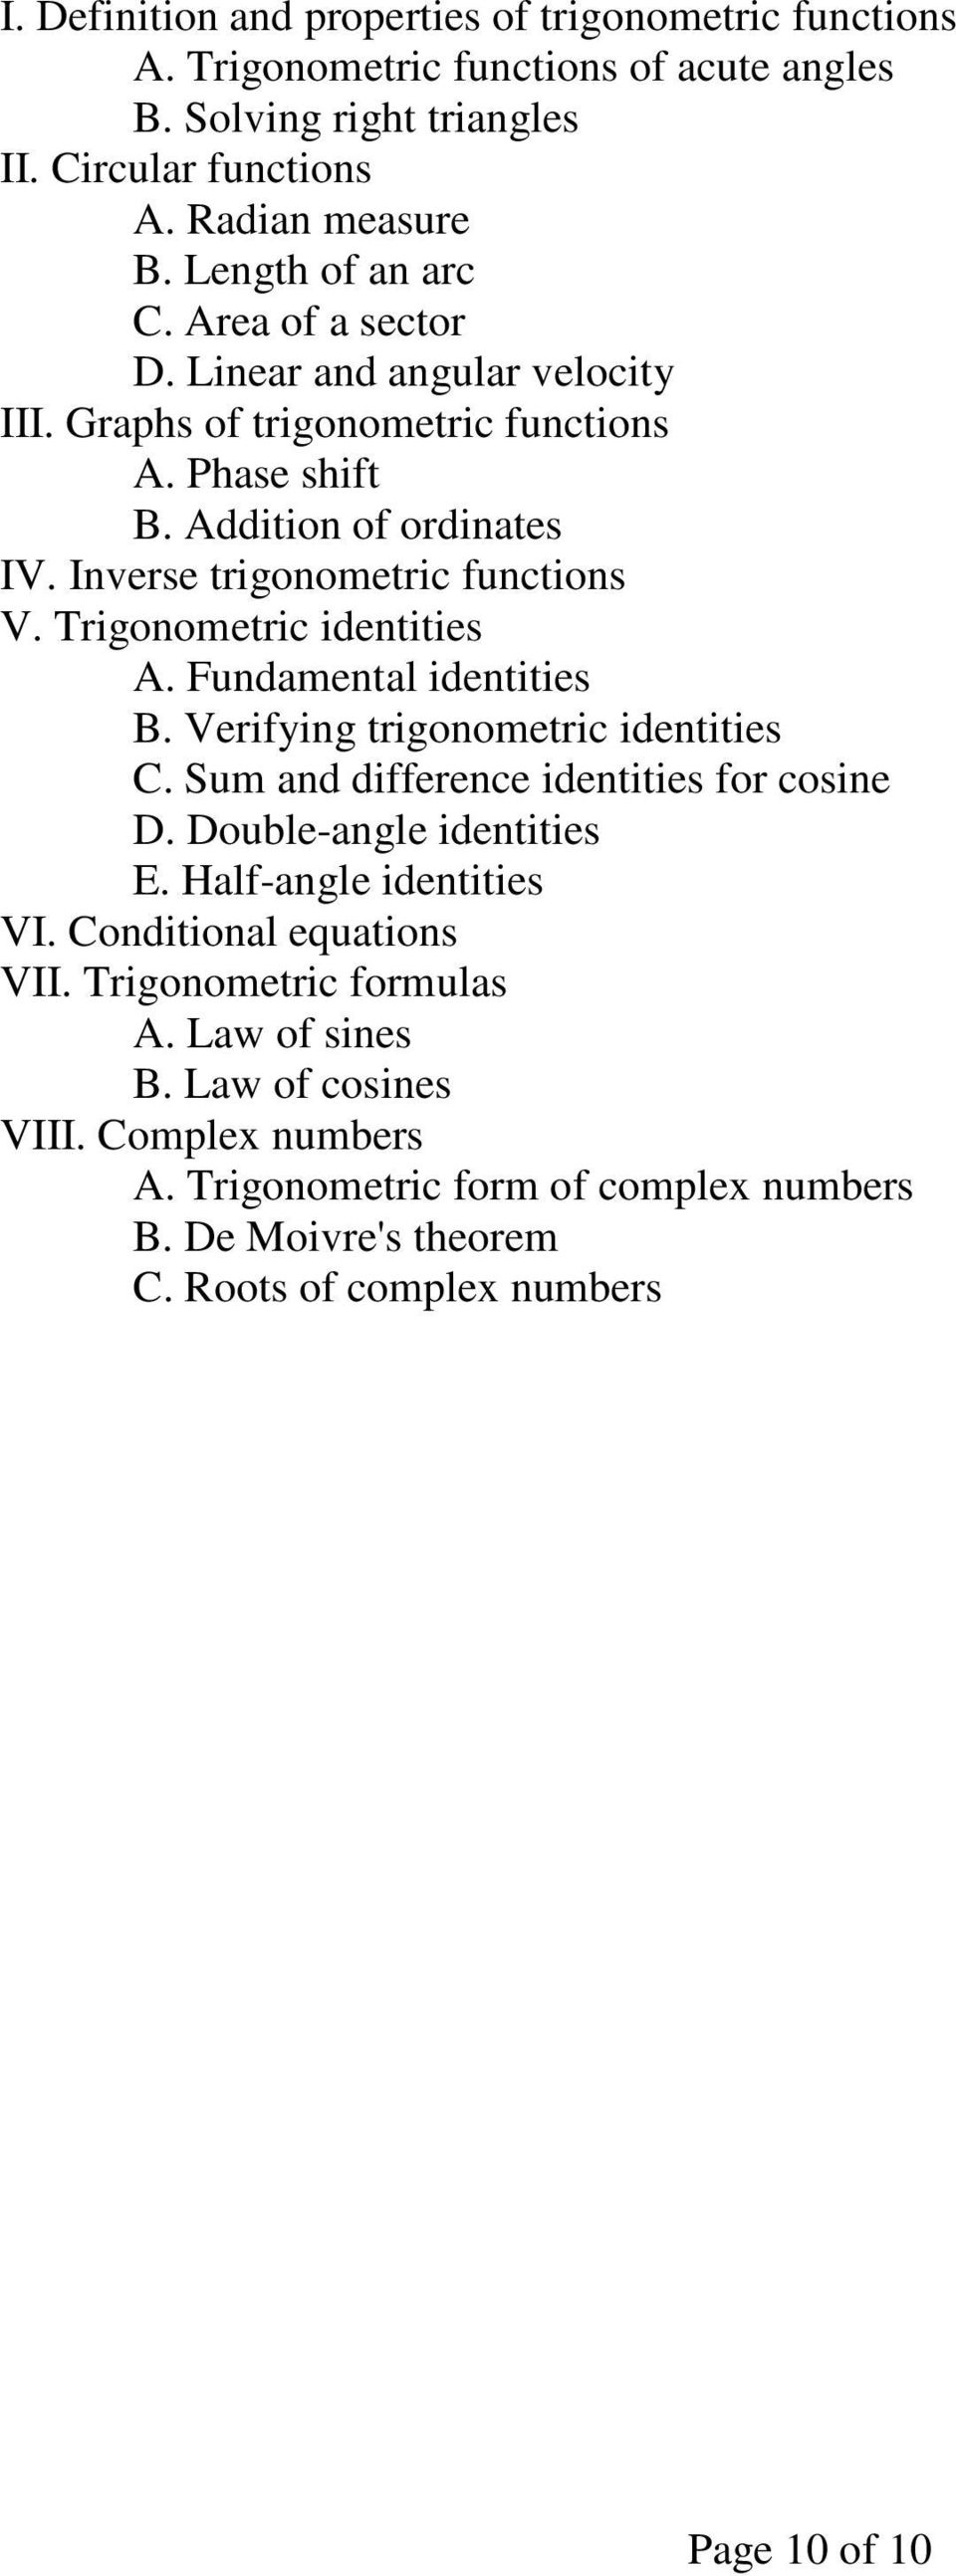 Trigonometric identities A. Fundamental identities B. Verifying trigonometric identities C. Sum and difference identities for cosine D. Double-angle identities E. Half-angle identities VI.